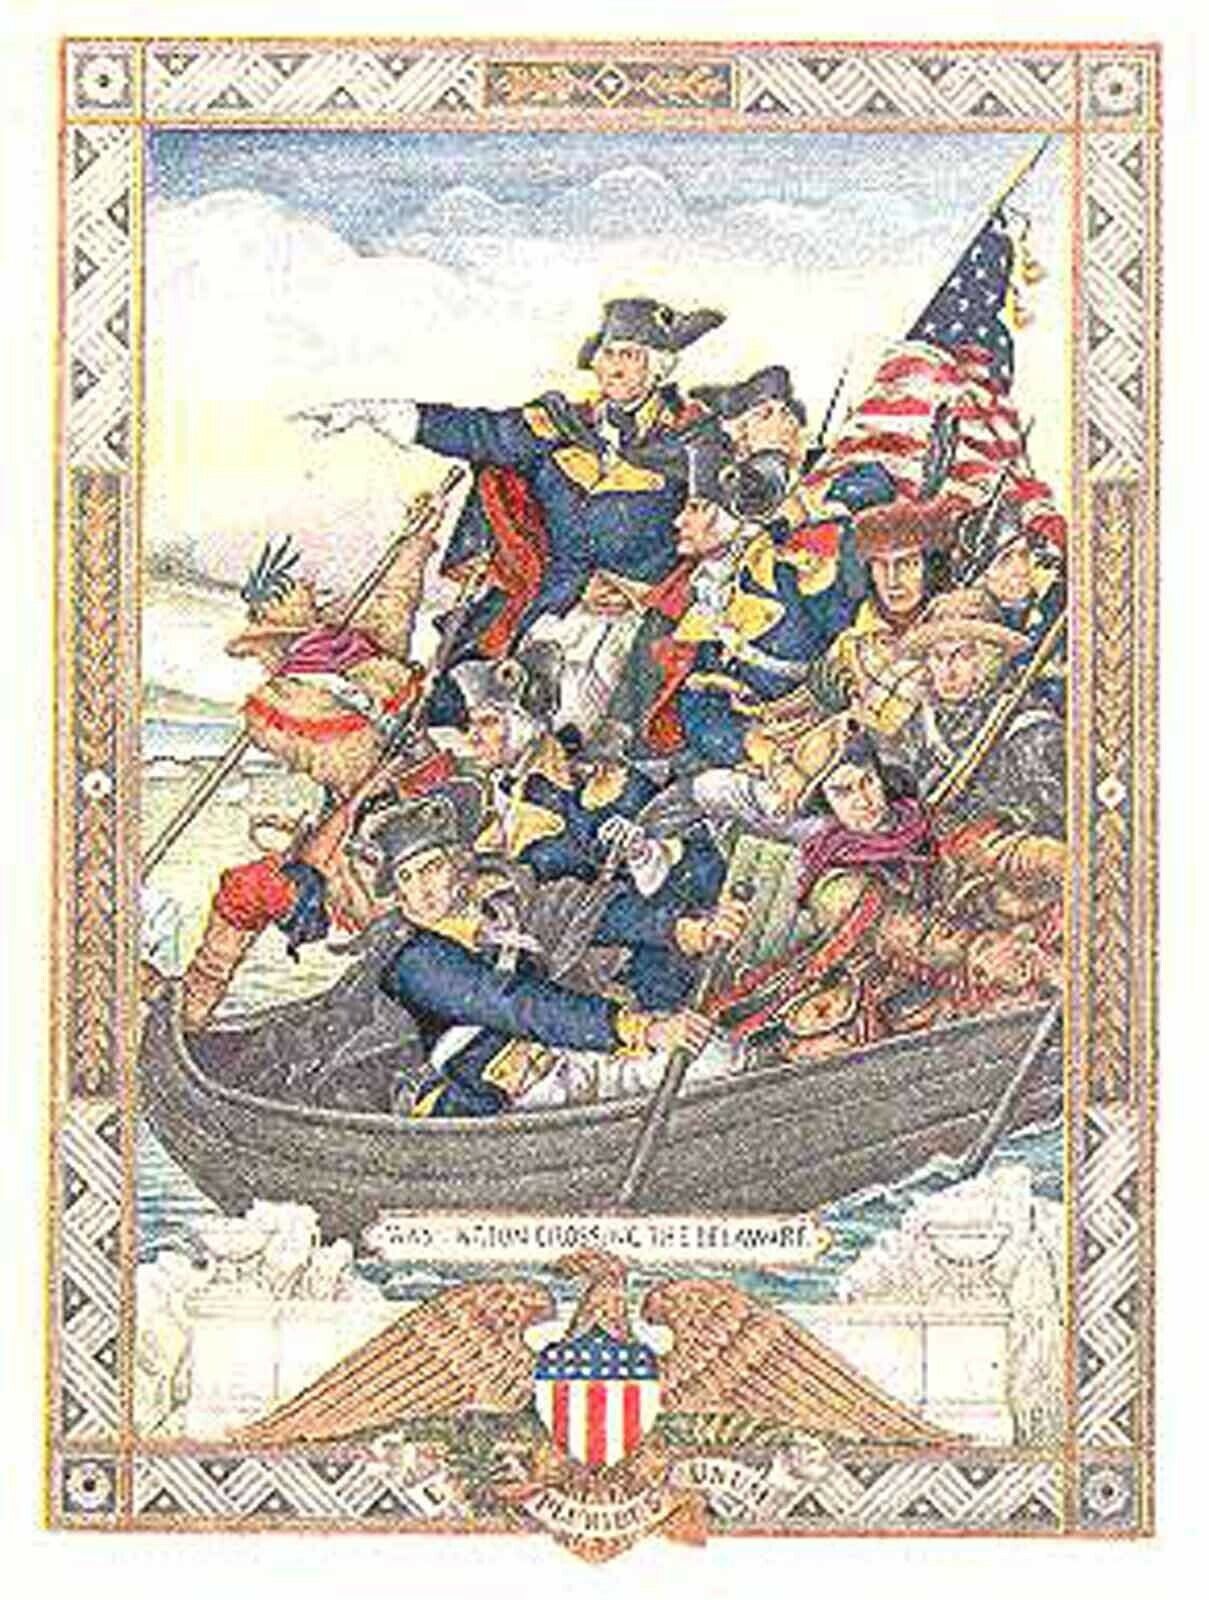 ARTHUR SZYK 1945 GEORGE WASHINGTON ARTWORK FEATURE VALLEY FORGE & DELAWARE RIVER